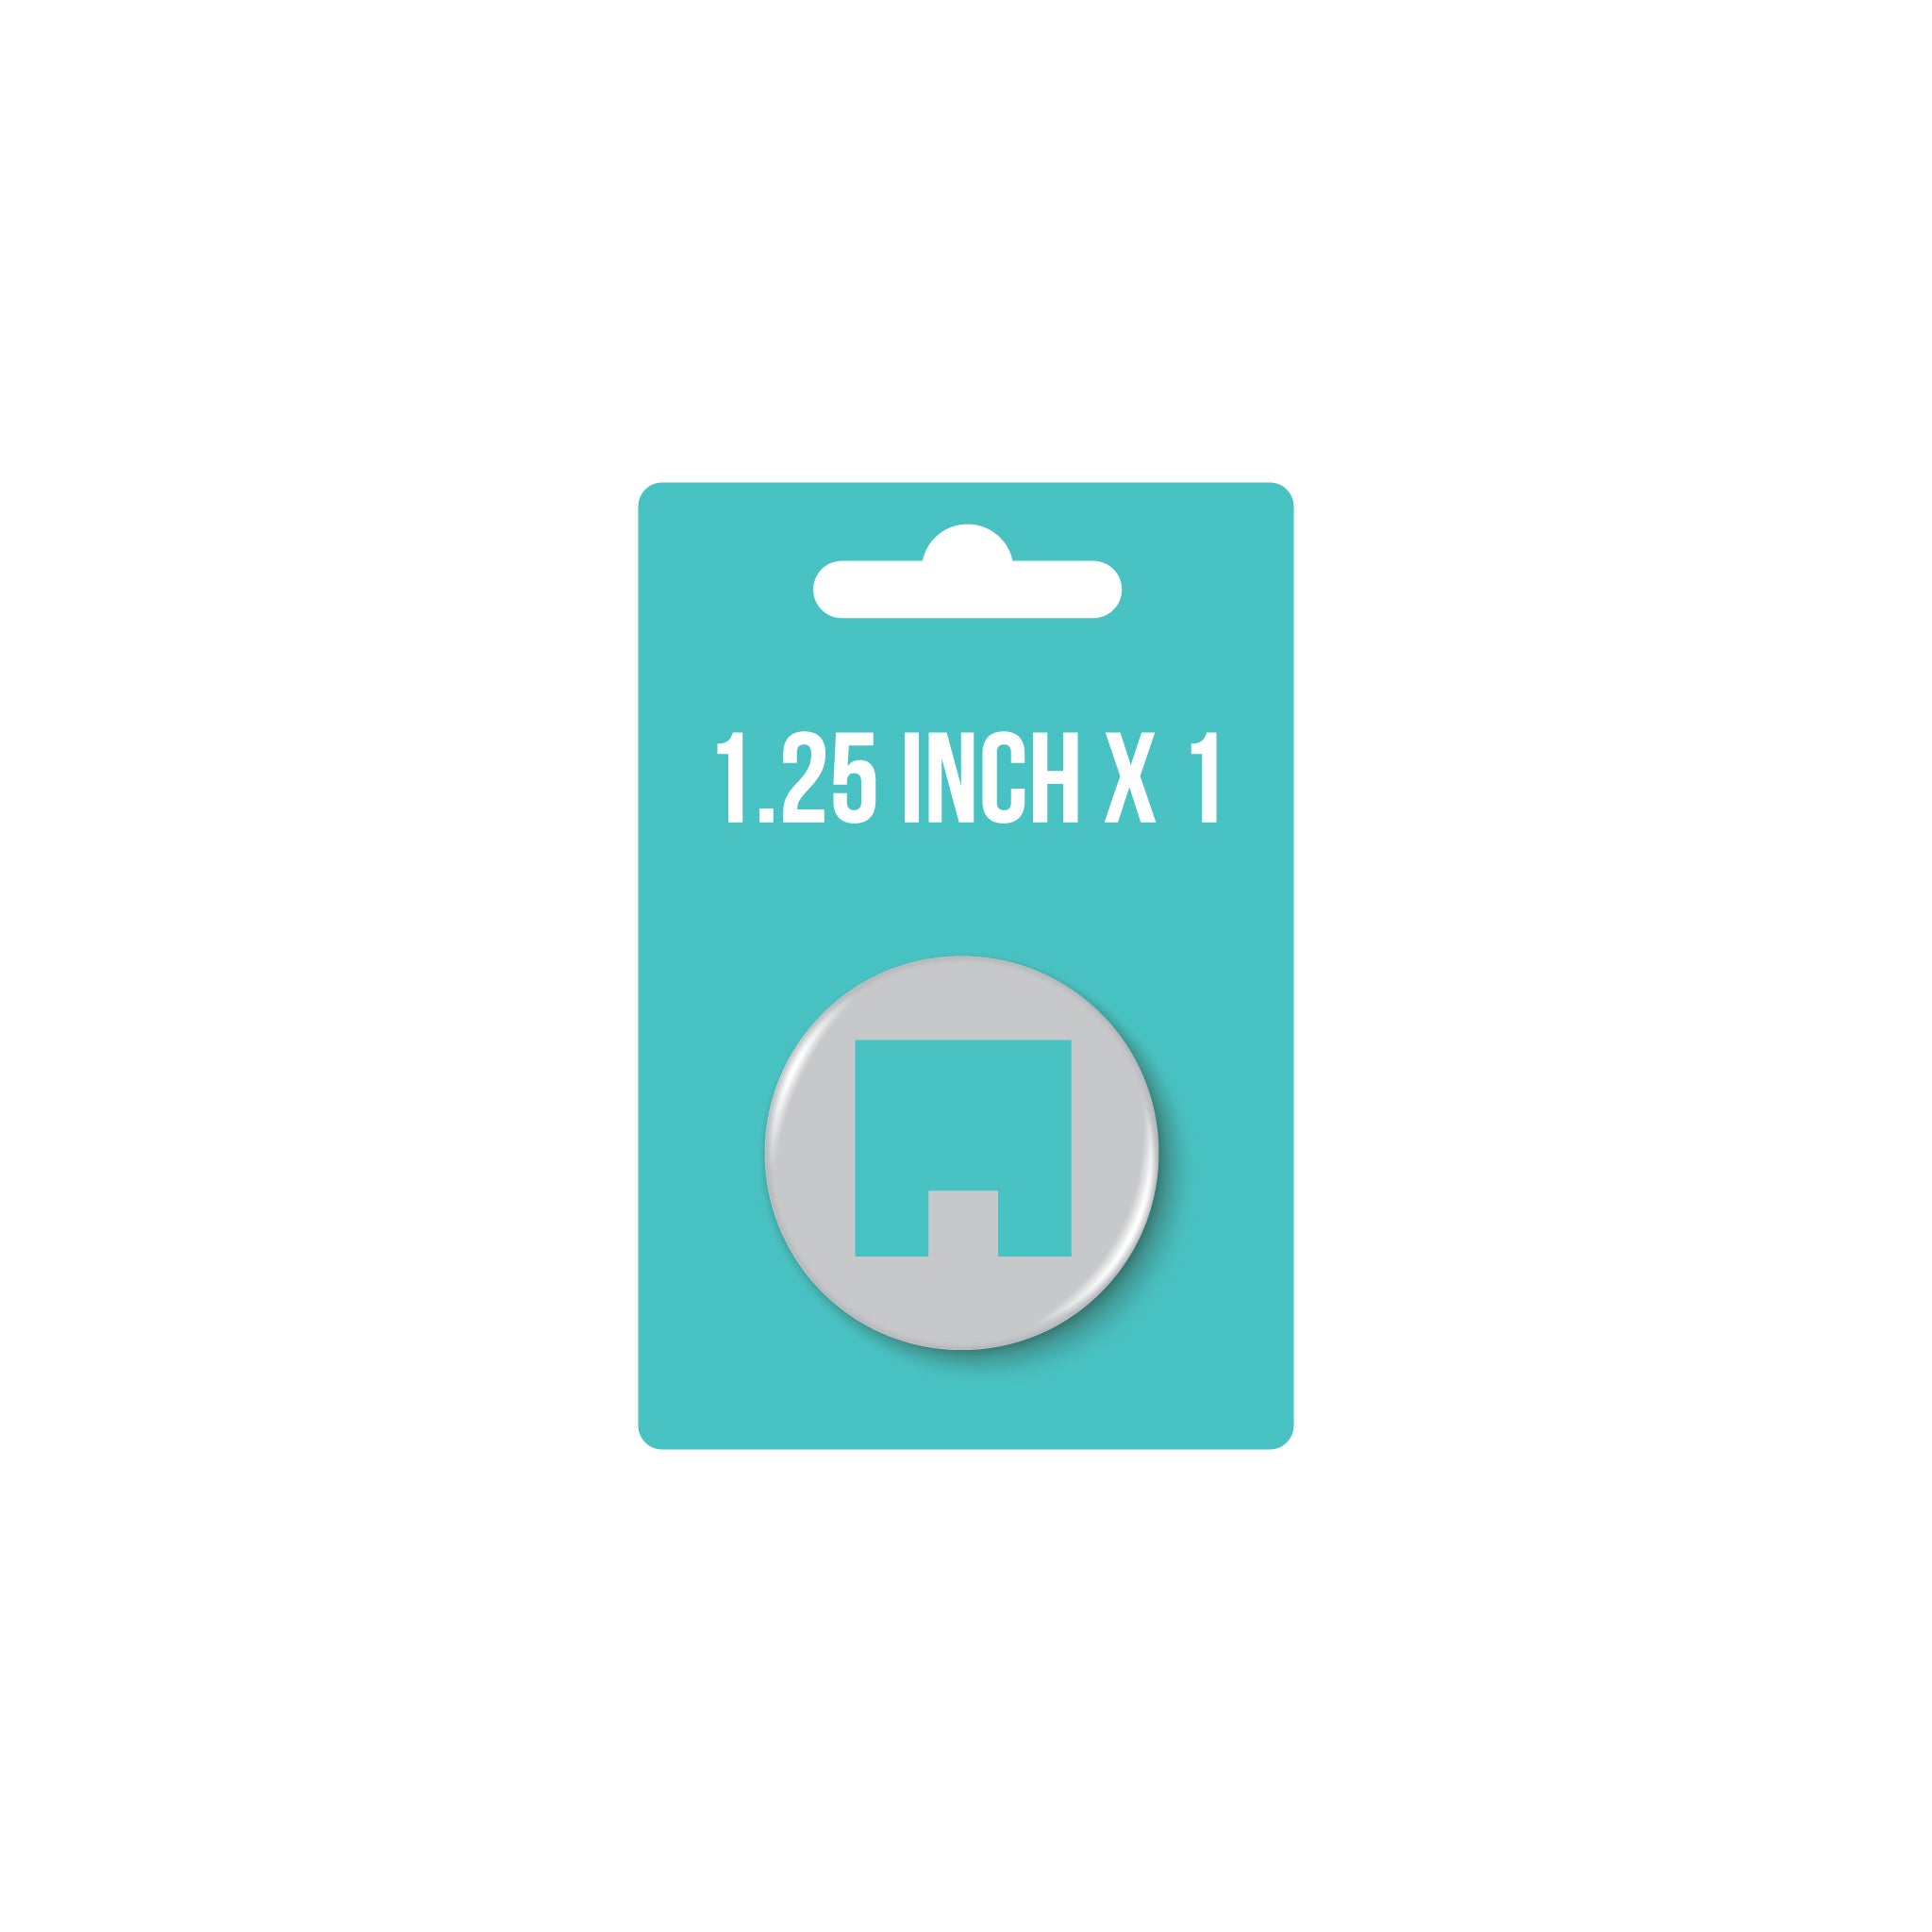 1.25" x 1 Button Pack